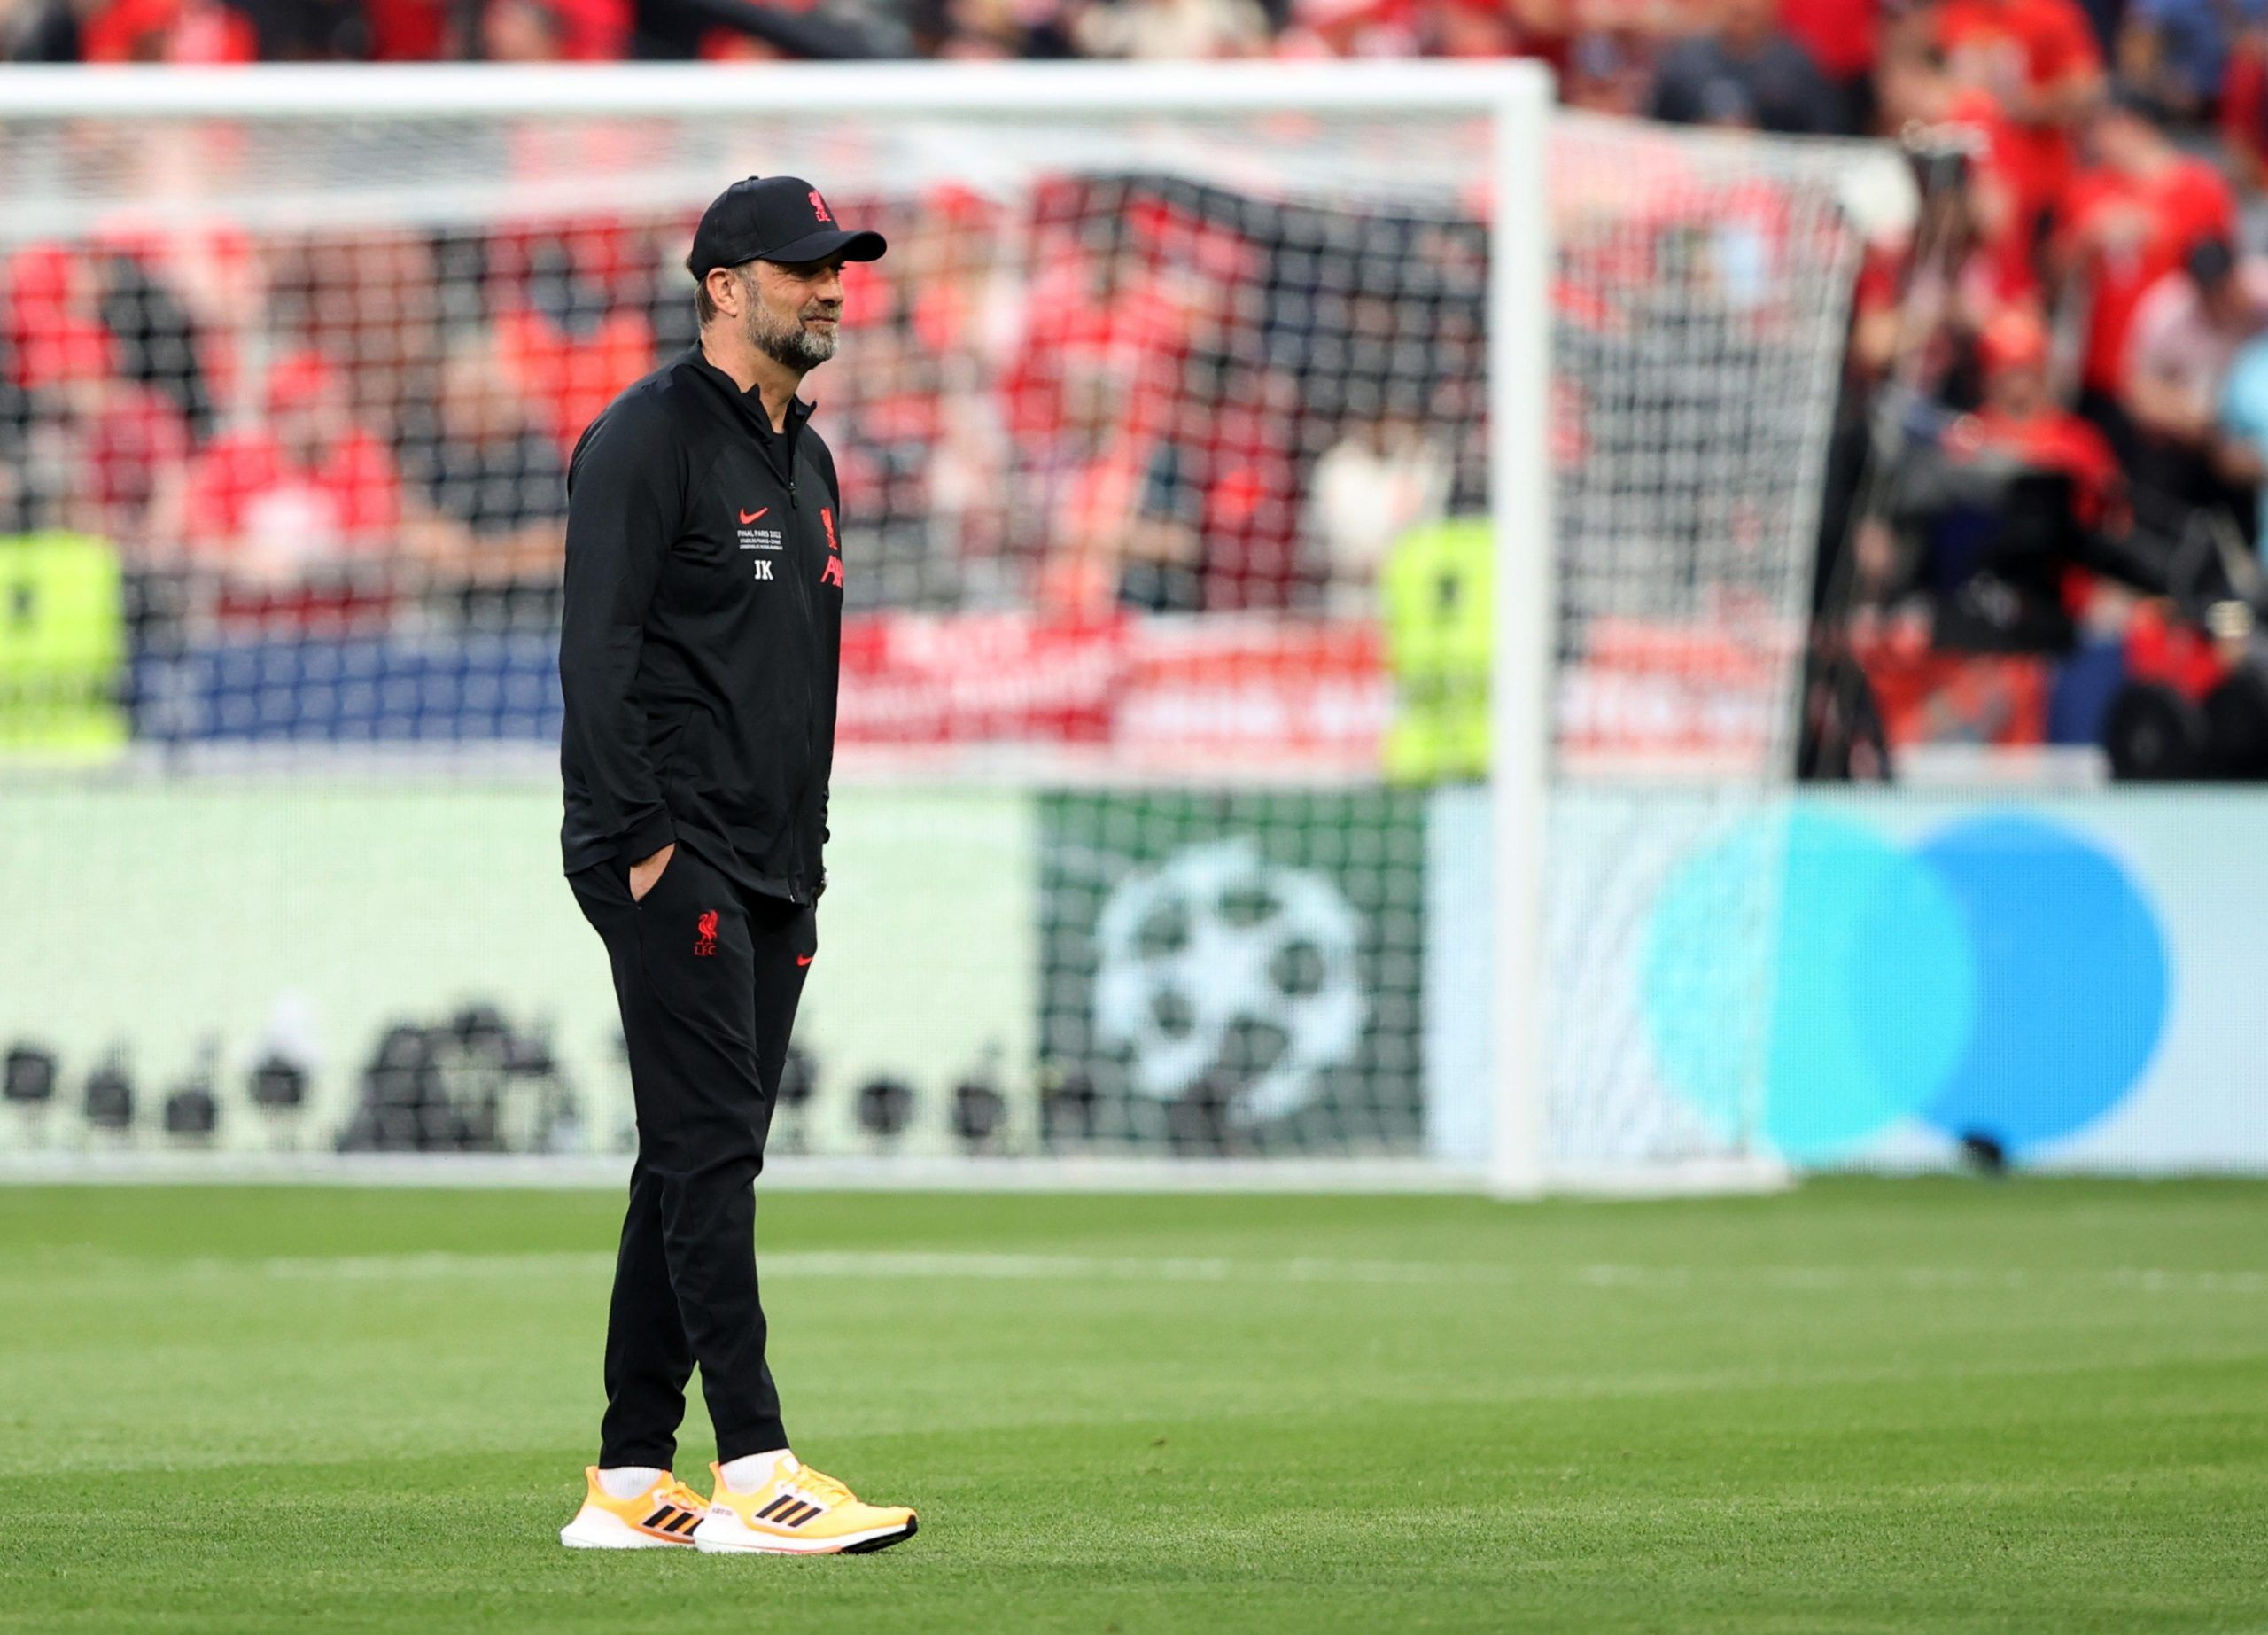 Soccer Football - Champions League Final - Liverpool v Real Madrid - Stade de France, Saint-Denis near Paris, France - May 28, 2022 Liverpool manager Juergen Klopp looks on as the players warm up as the match is delayed REUTERS/Molly Darlington